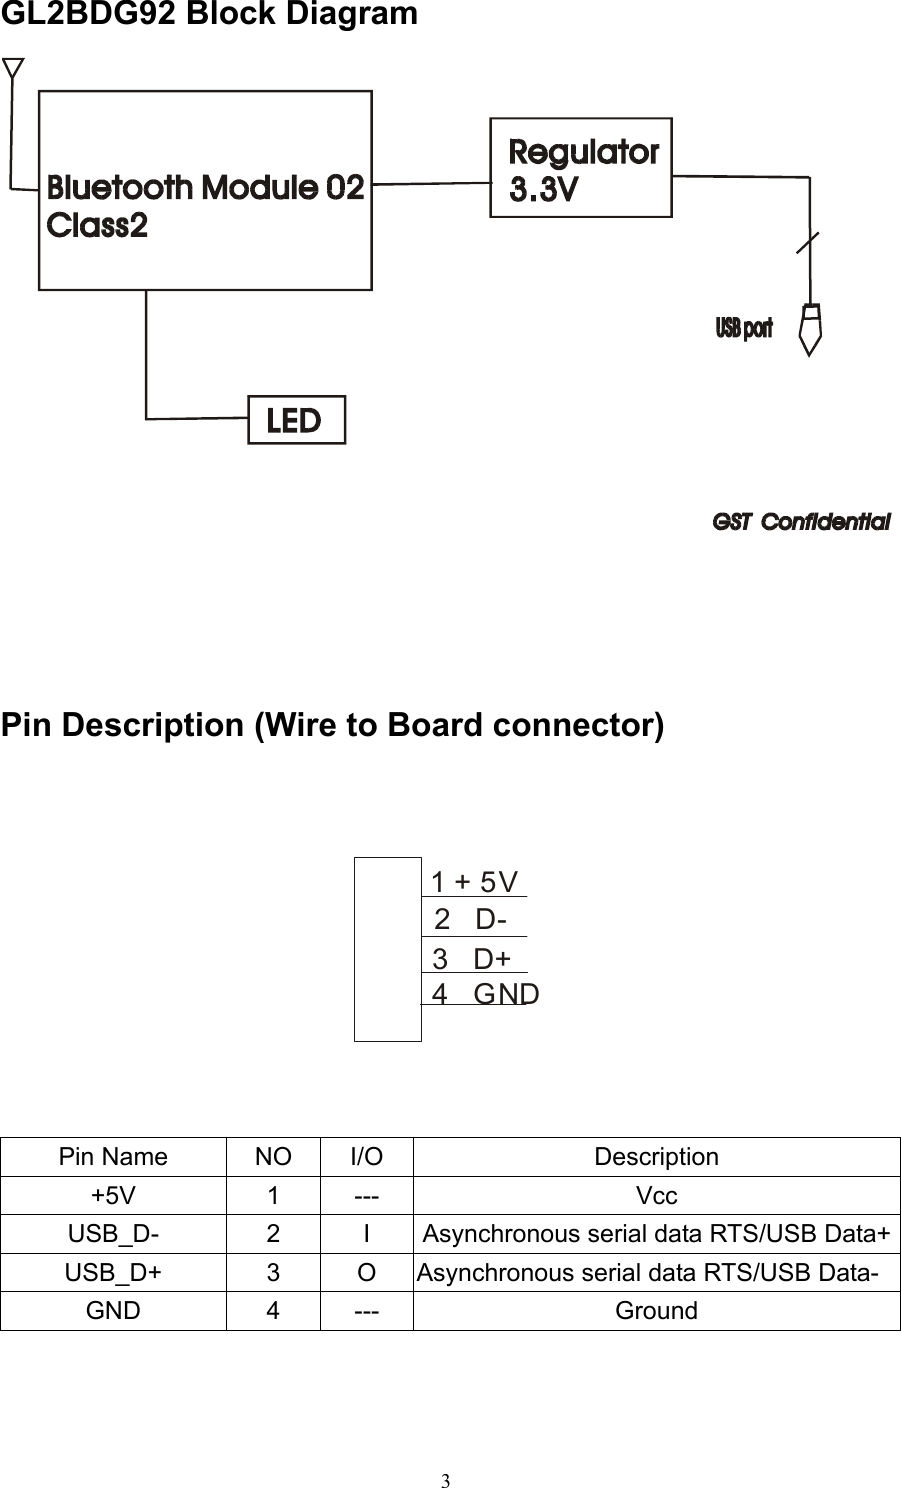  GL2BDG92 Block Diagram      Pin Description (Wire to Board connector)   1 + 5V2   D-3   D+4   GND   Pin Name  NO  I/O  Description +5V 1 ---  Vcc USB_D-  2  I  Asynchronous serial data RTS/USB Data+USB_D+  3  O  Asynchronous serial data RTS/USB Data- GND 4 ---  Ground   3